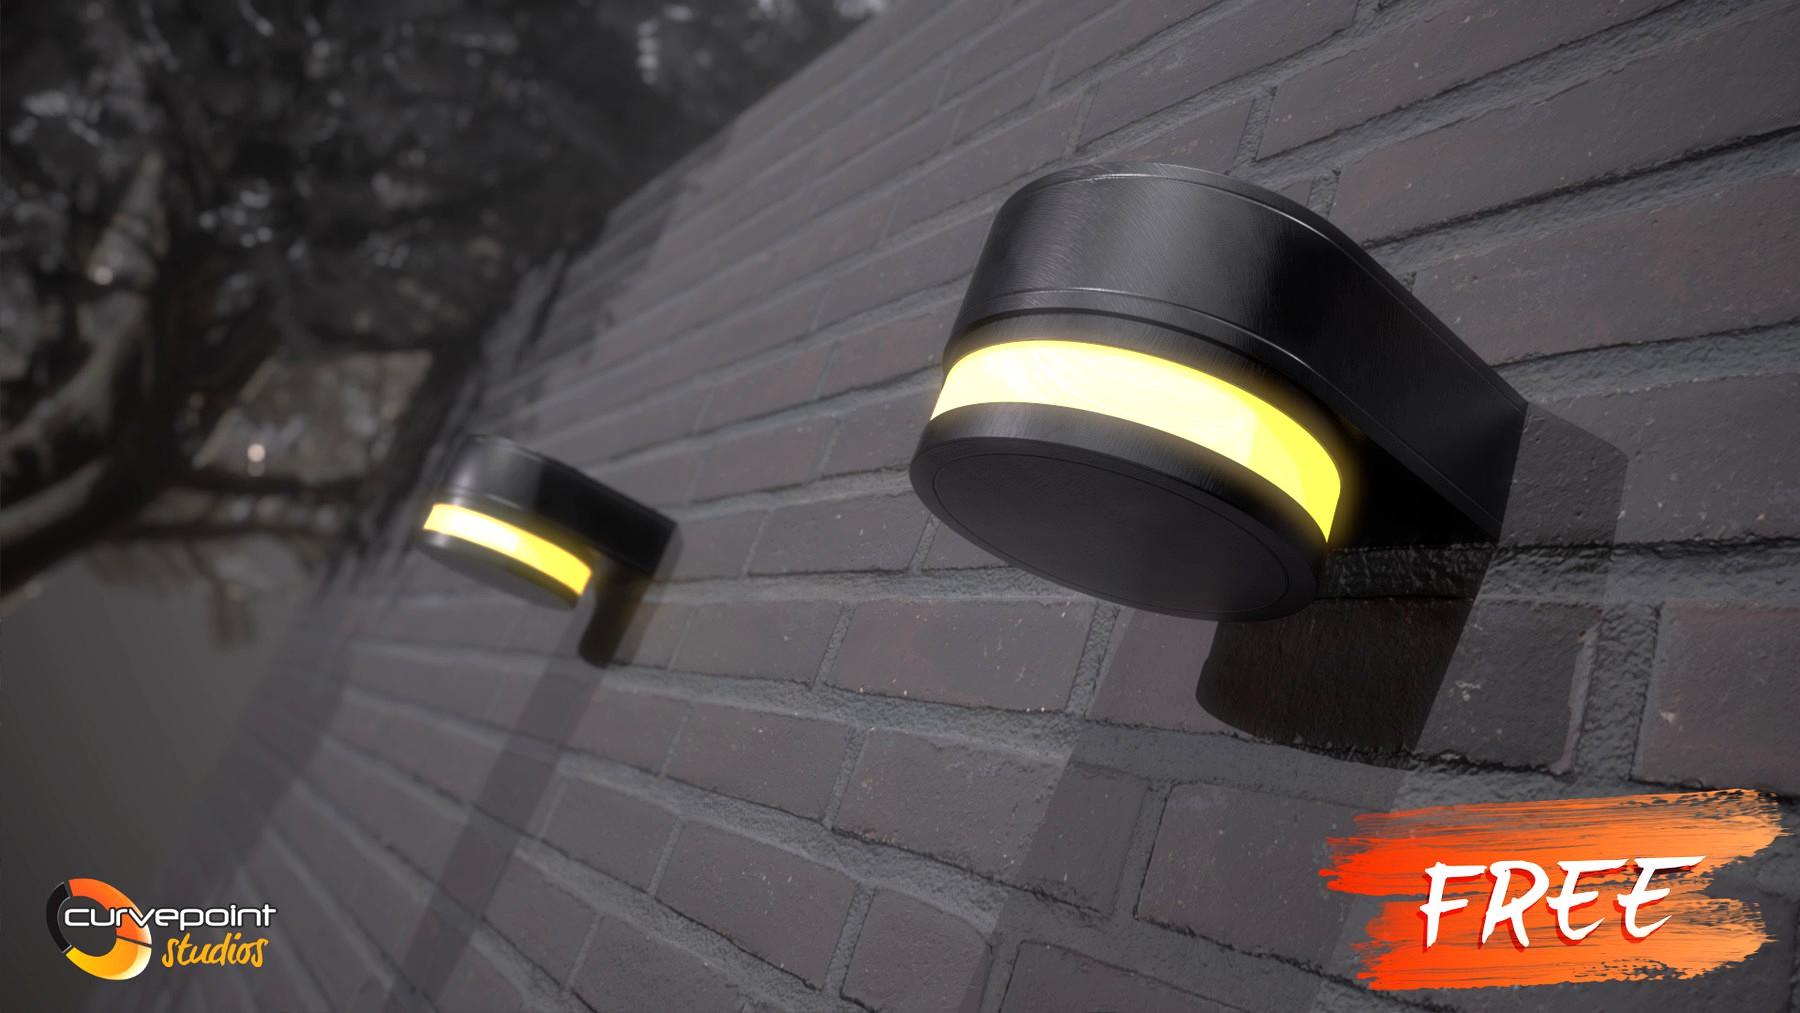 Outdoor Wall Lights (Free Pack)